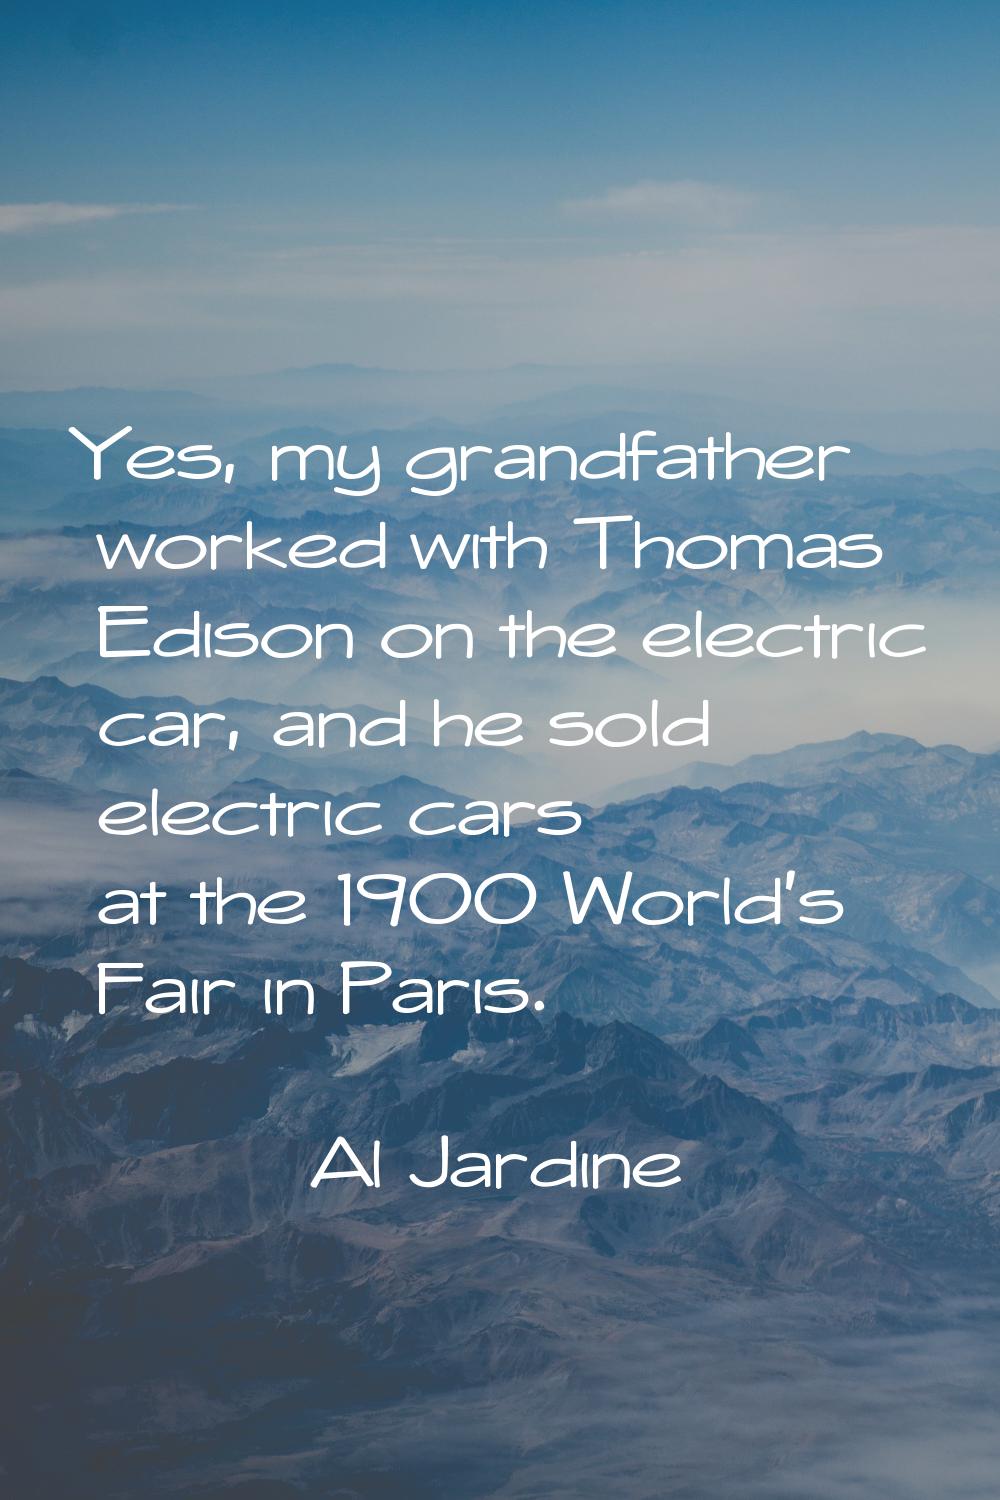 Yes, my grandfather worked with Thomas Edison on the electric car, and he sold electric cars at the